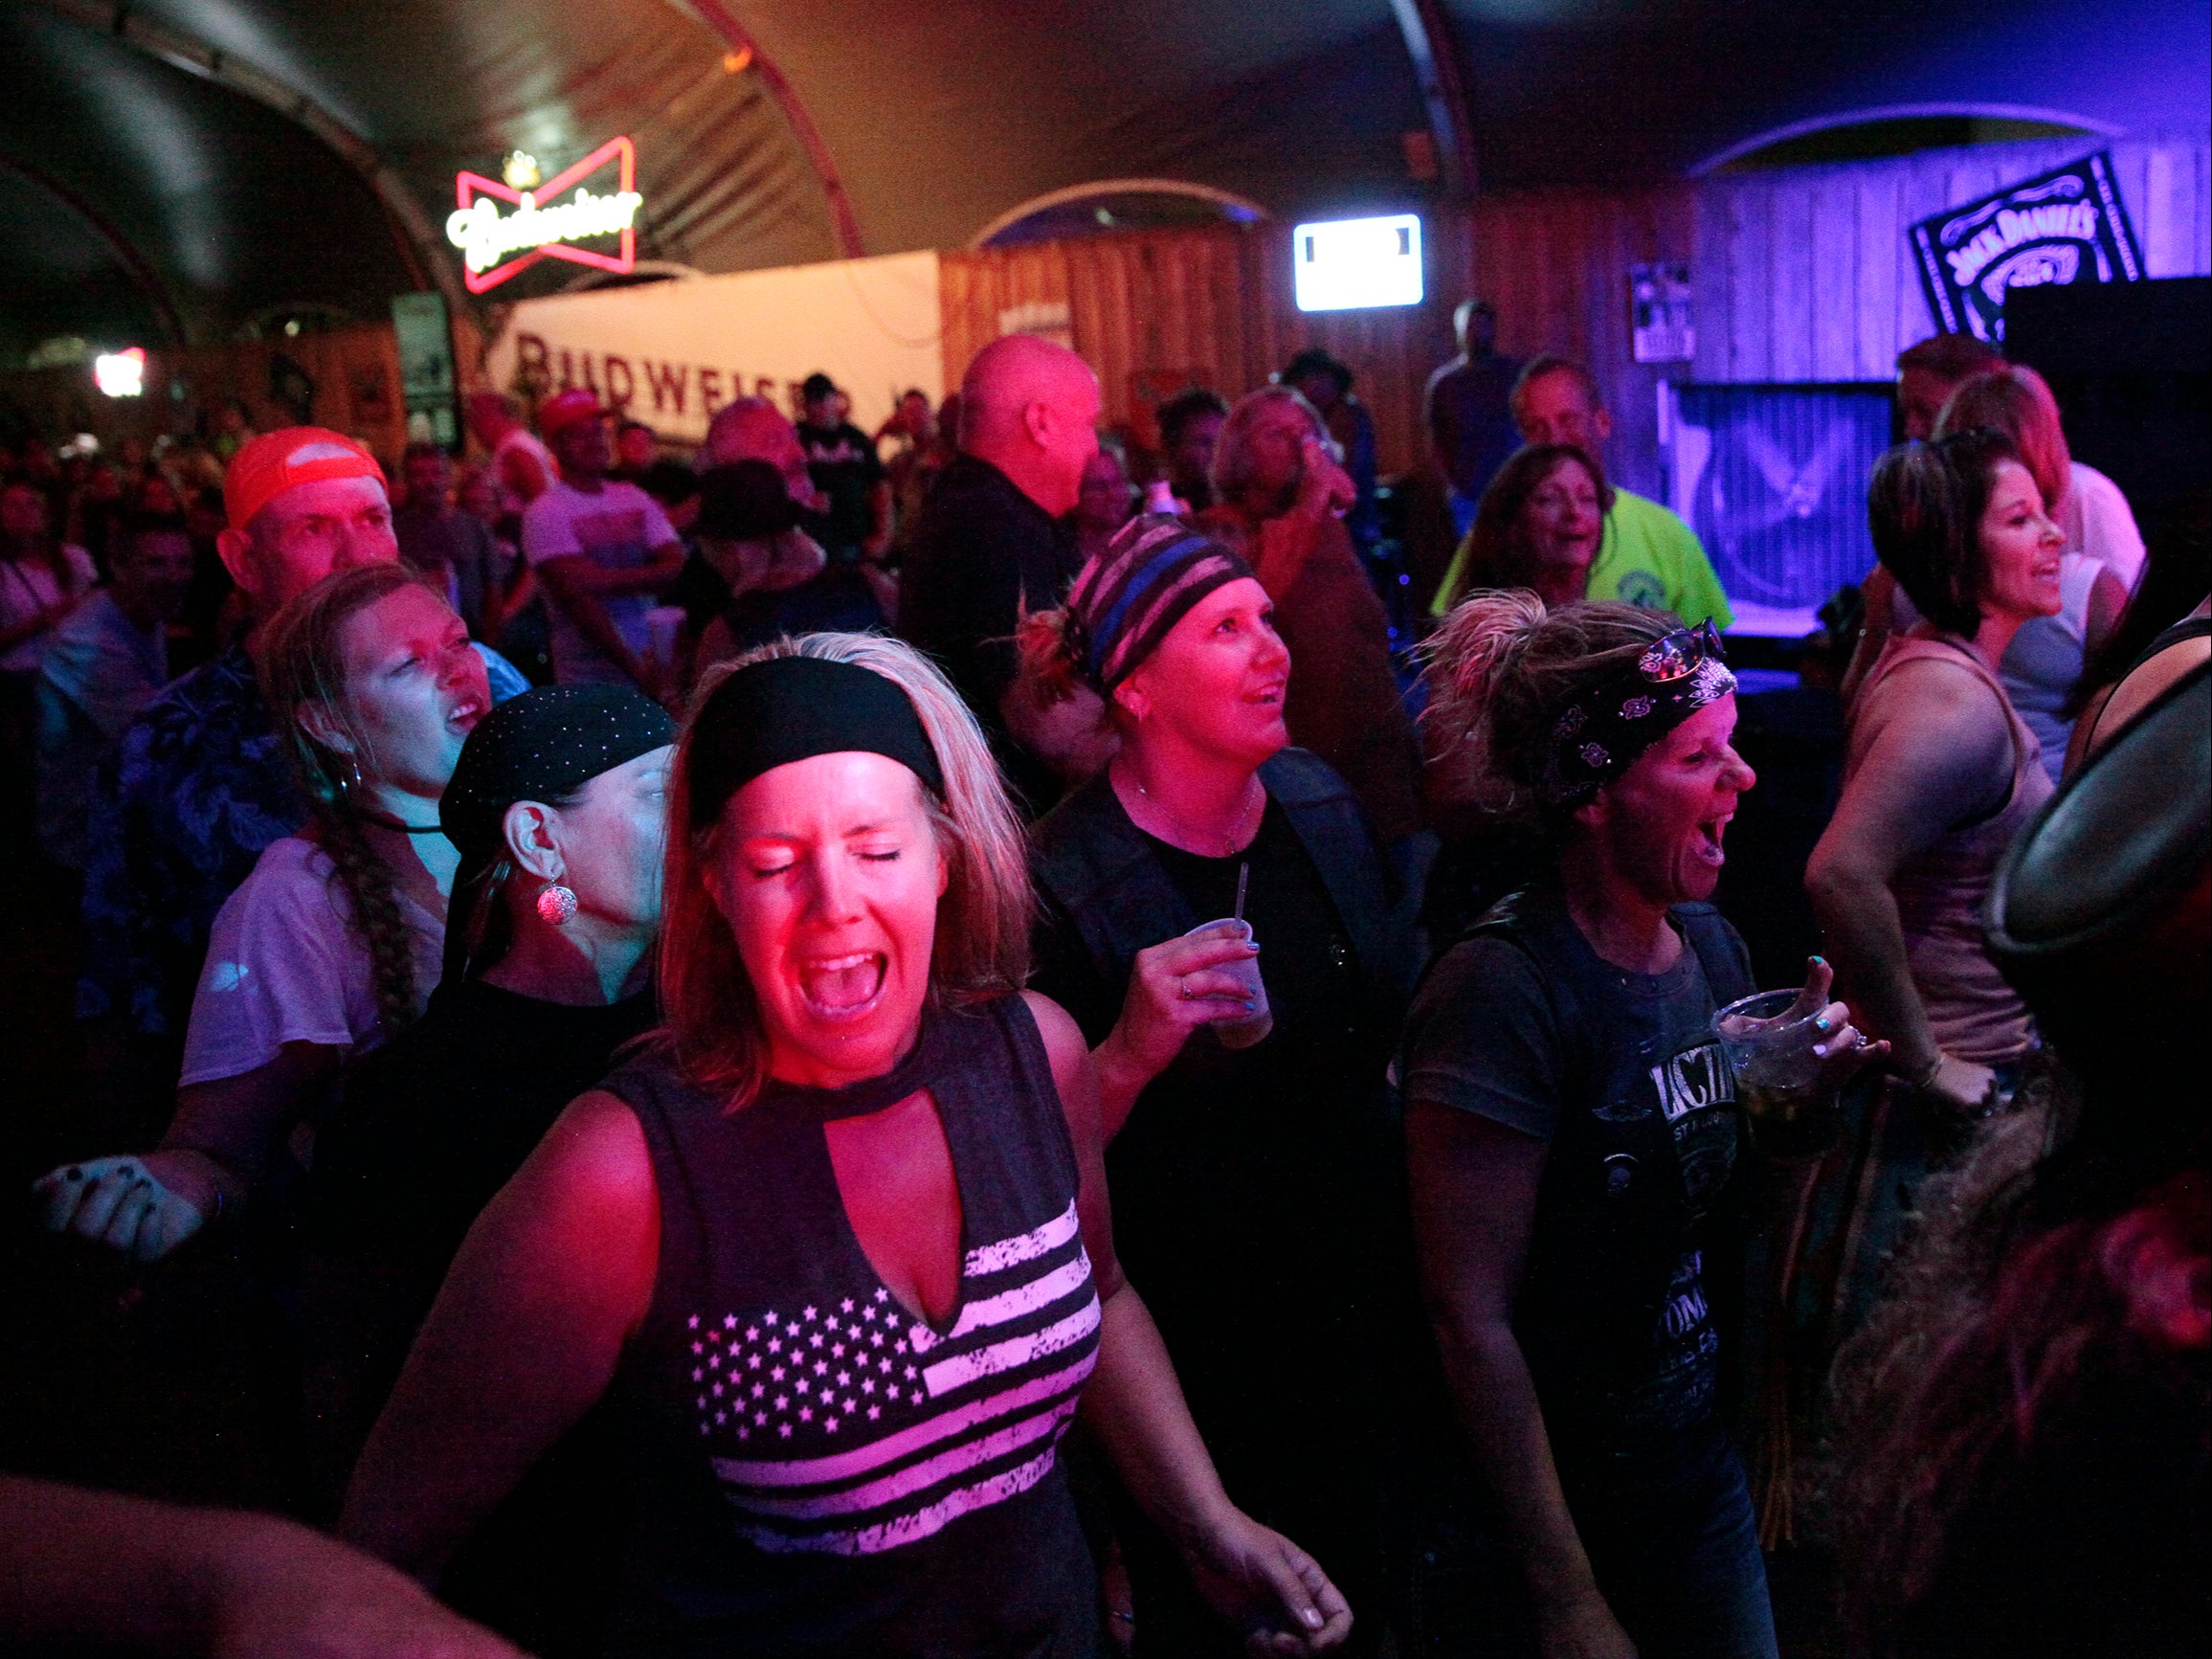 People sing and dance at a rock concert on Thursday, Aug. 5, 2021, in Sturgis, S.D. The Sturgis Motorcycle Rally starts Friday, even as coronavirus cases rise in South Dakota.